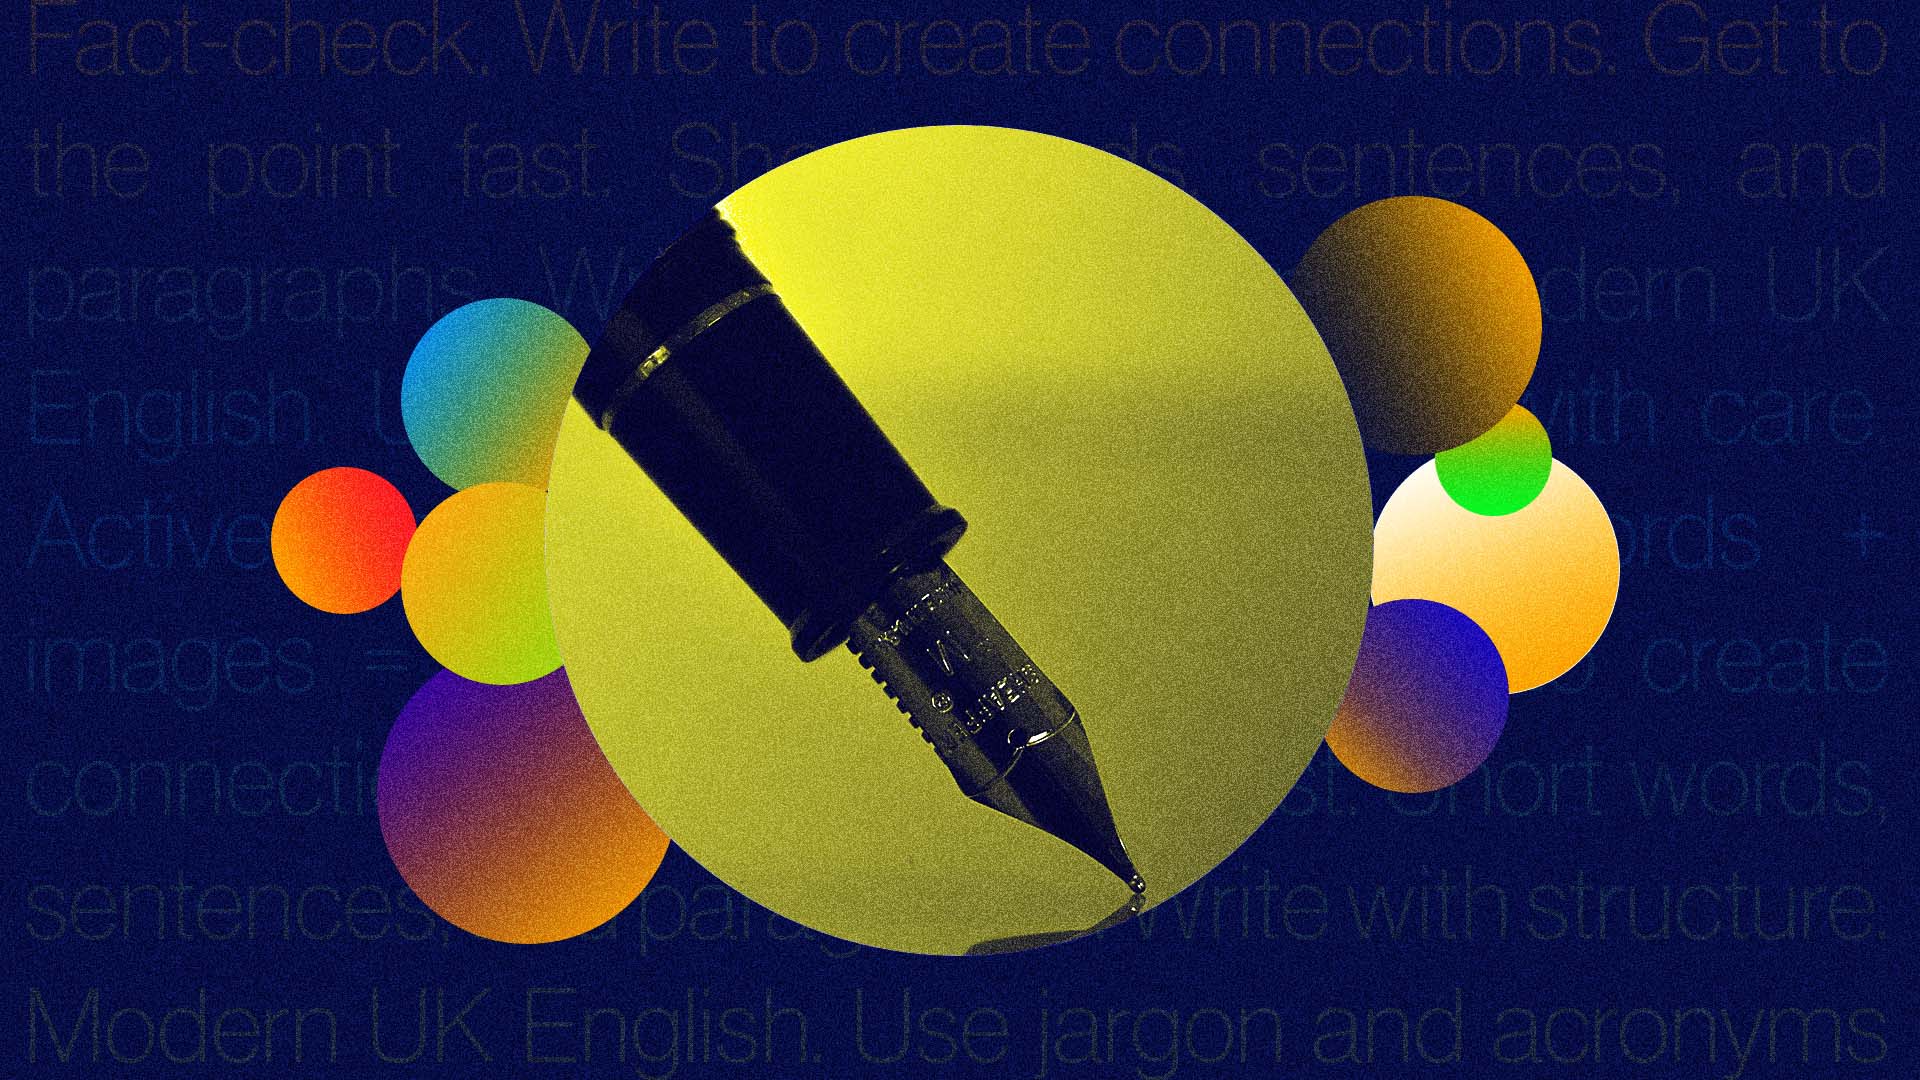 Big Blue’s Writing Style Guide 2021